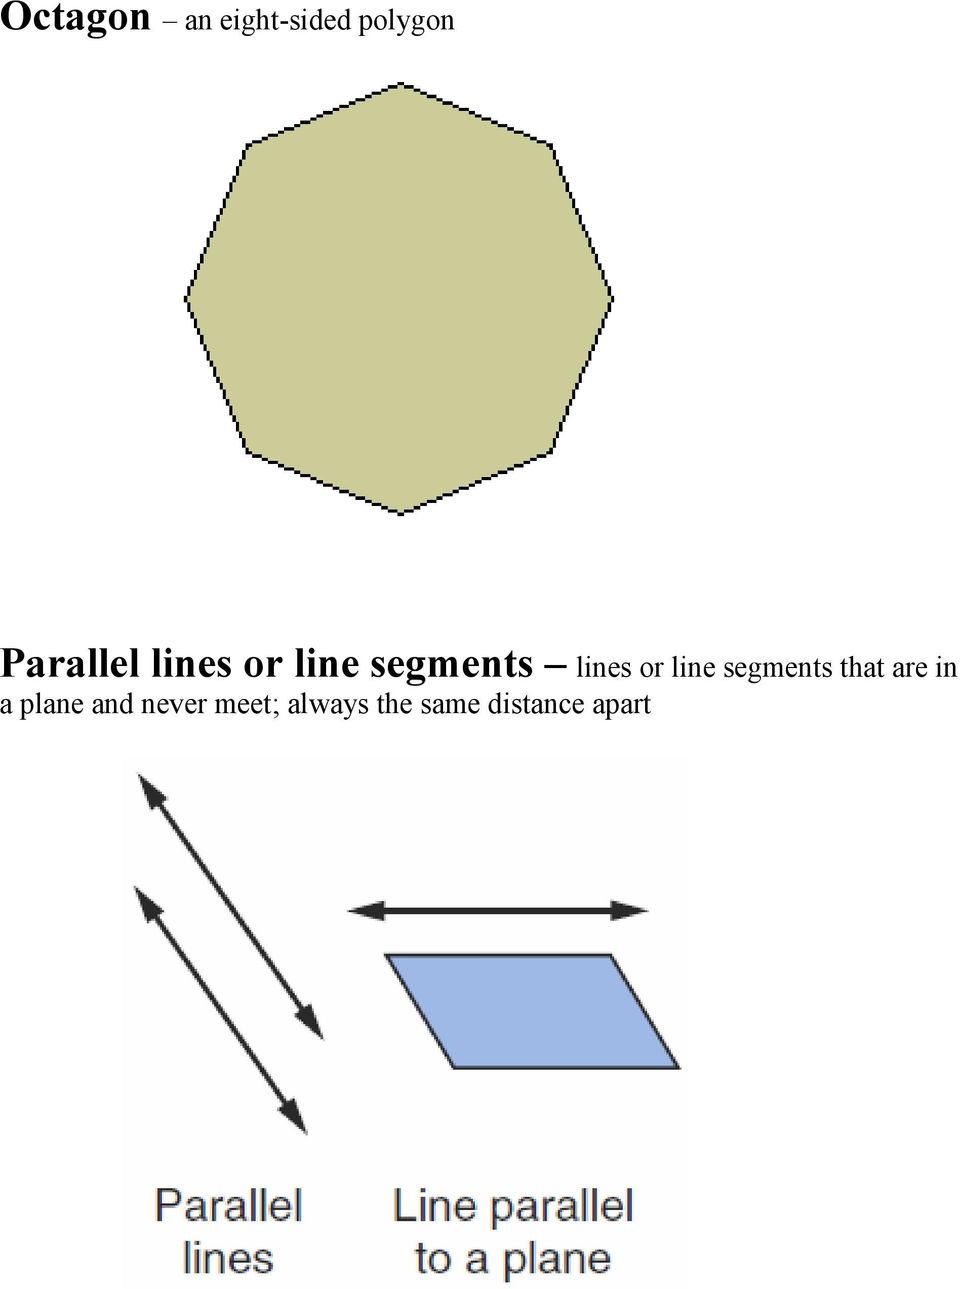 or line segments that are in a plane